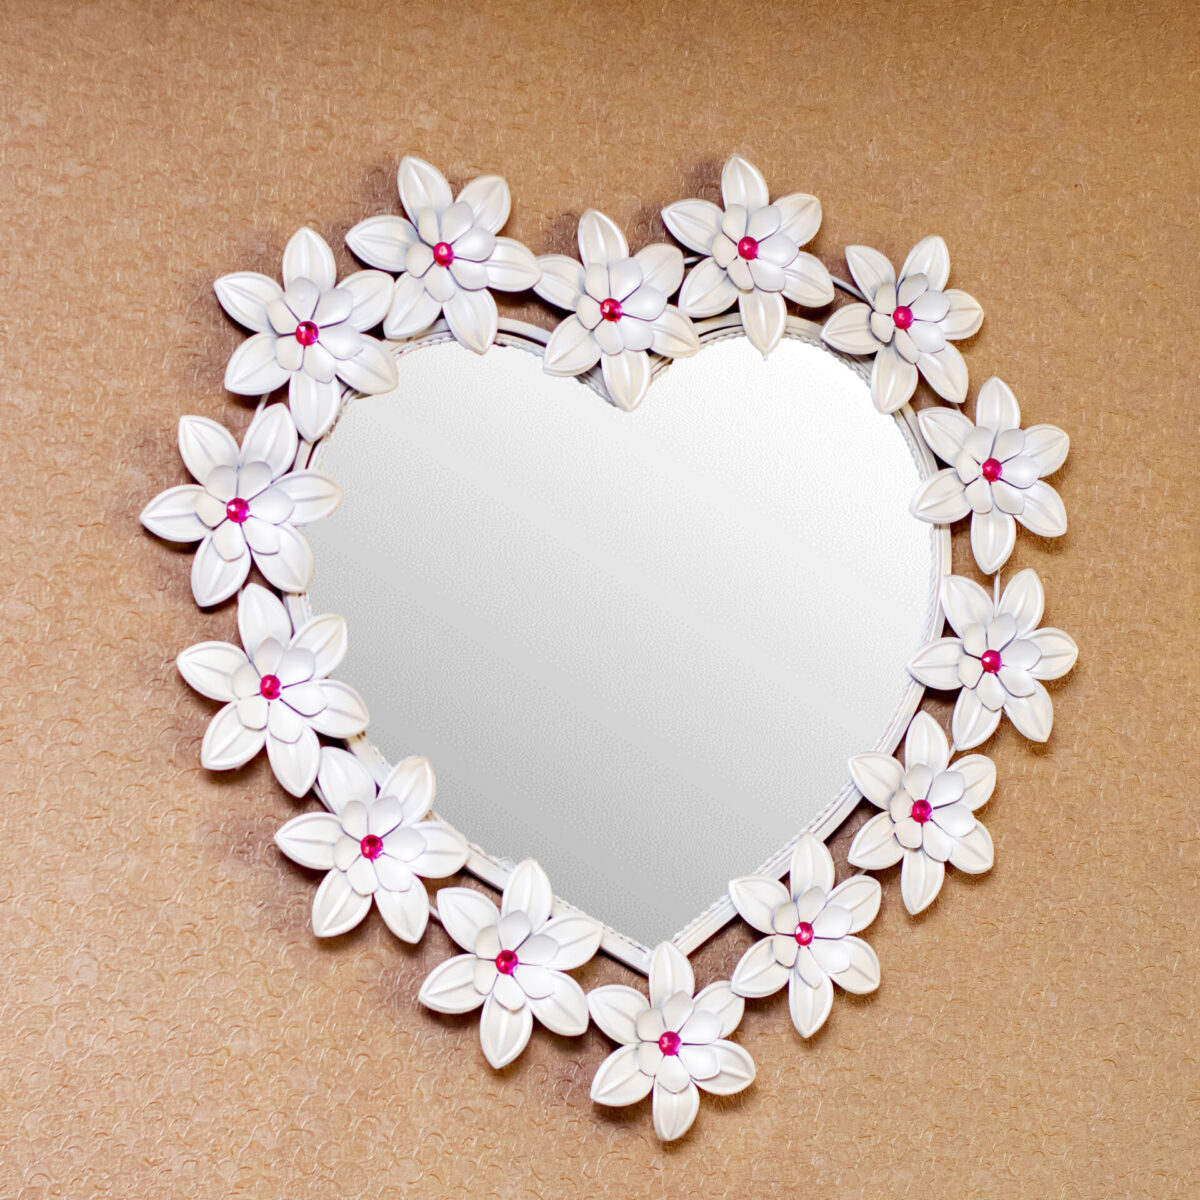 accent-wall-mirror-heart-shaped-in-a-white-floral-frame-with-stones-394435